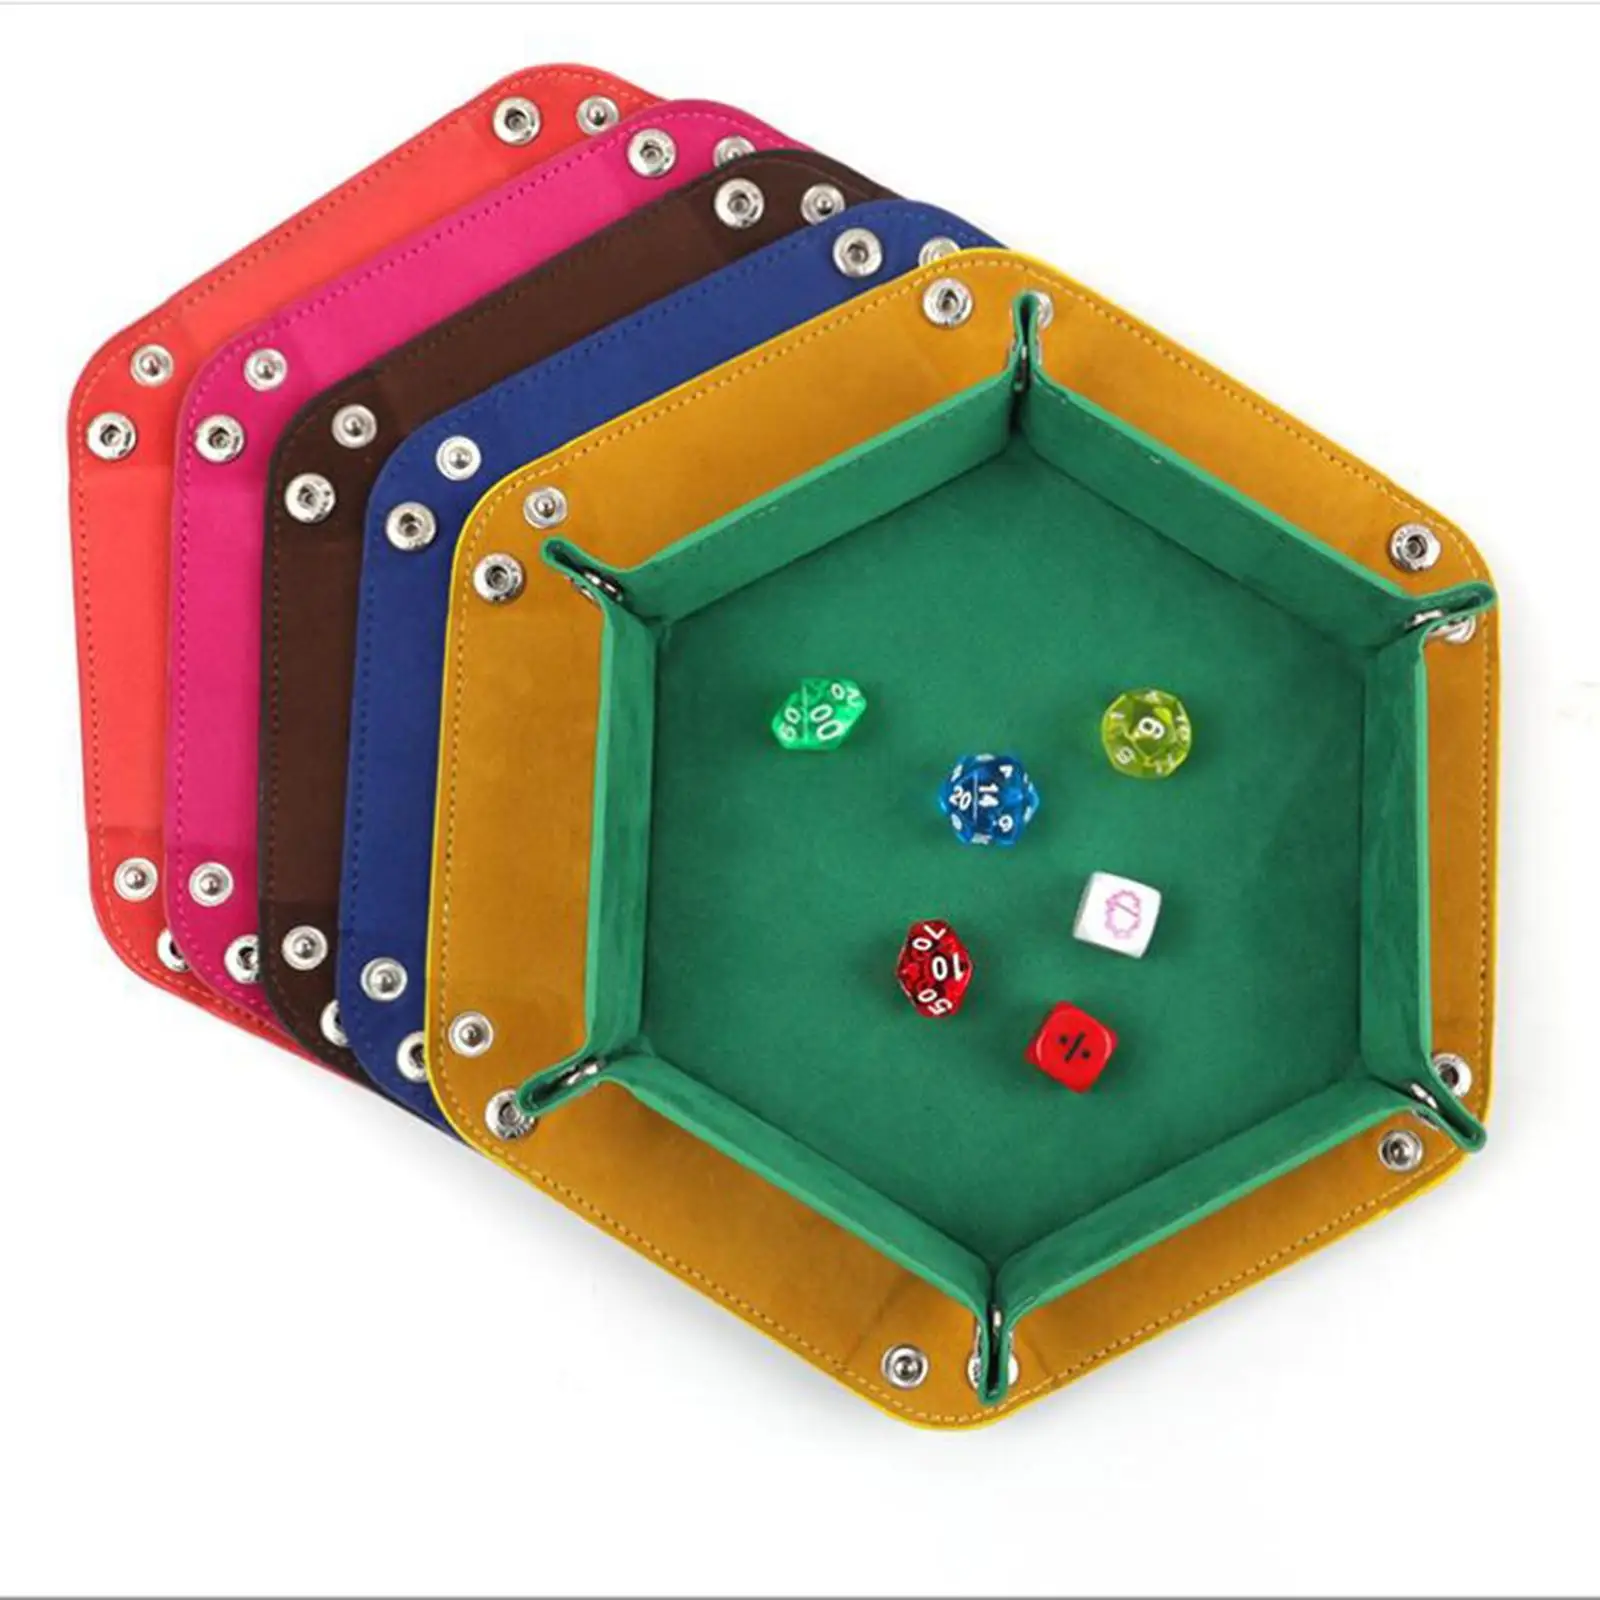  Foldable Dice Tray Holder PU Leather Velvet for Table Games Candies Earbuds Table Board Roleplaying Game Dice Holder Box 